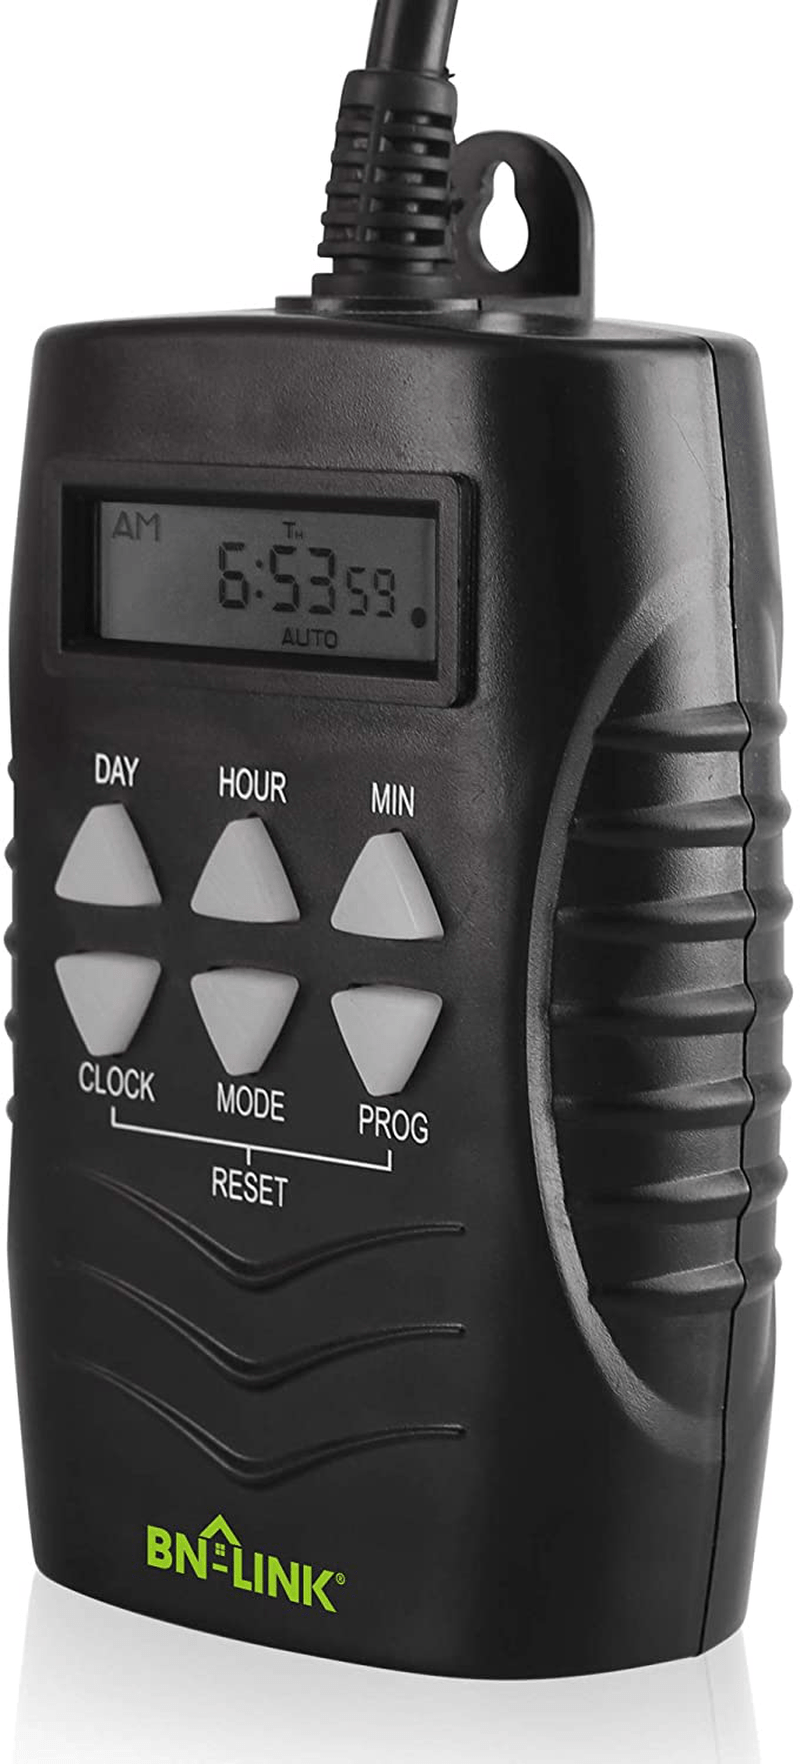 BN-LINK 7 Day Outdoor Heavy Duty Digital Programmable Timer BND/U78, 125VAC, 60Hz, Dual Outlet, Weatherproof, Heavy Duty, Accurate For Lamps Ponds Christmas Lights 1875W 1/2HP ETL Listed